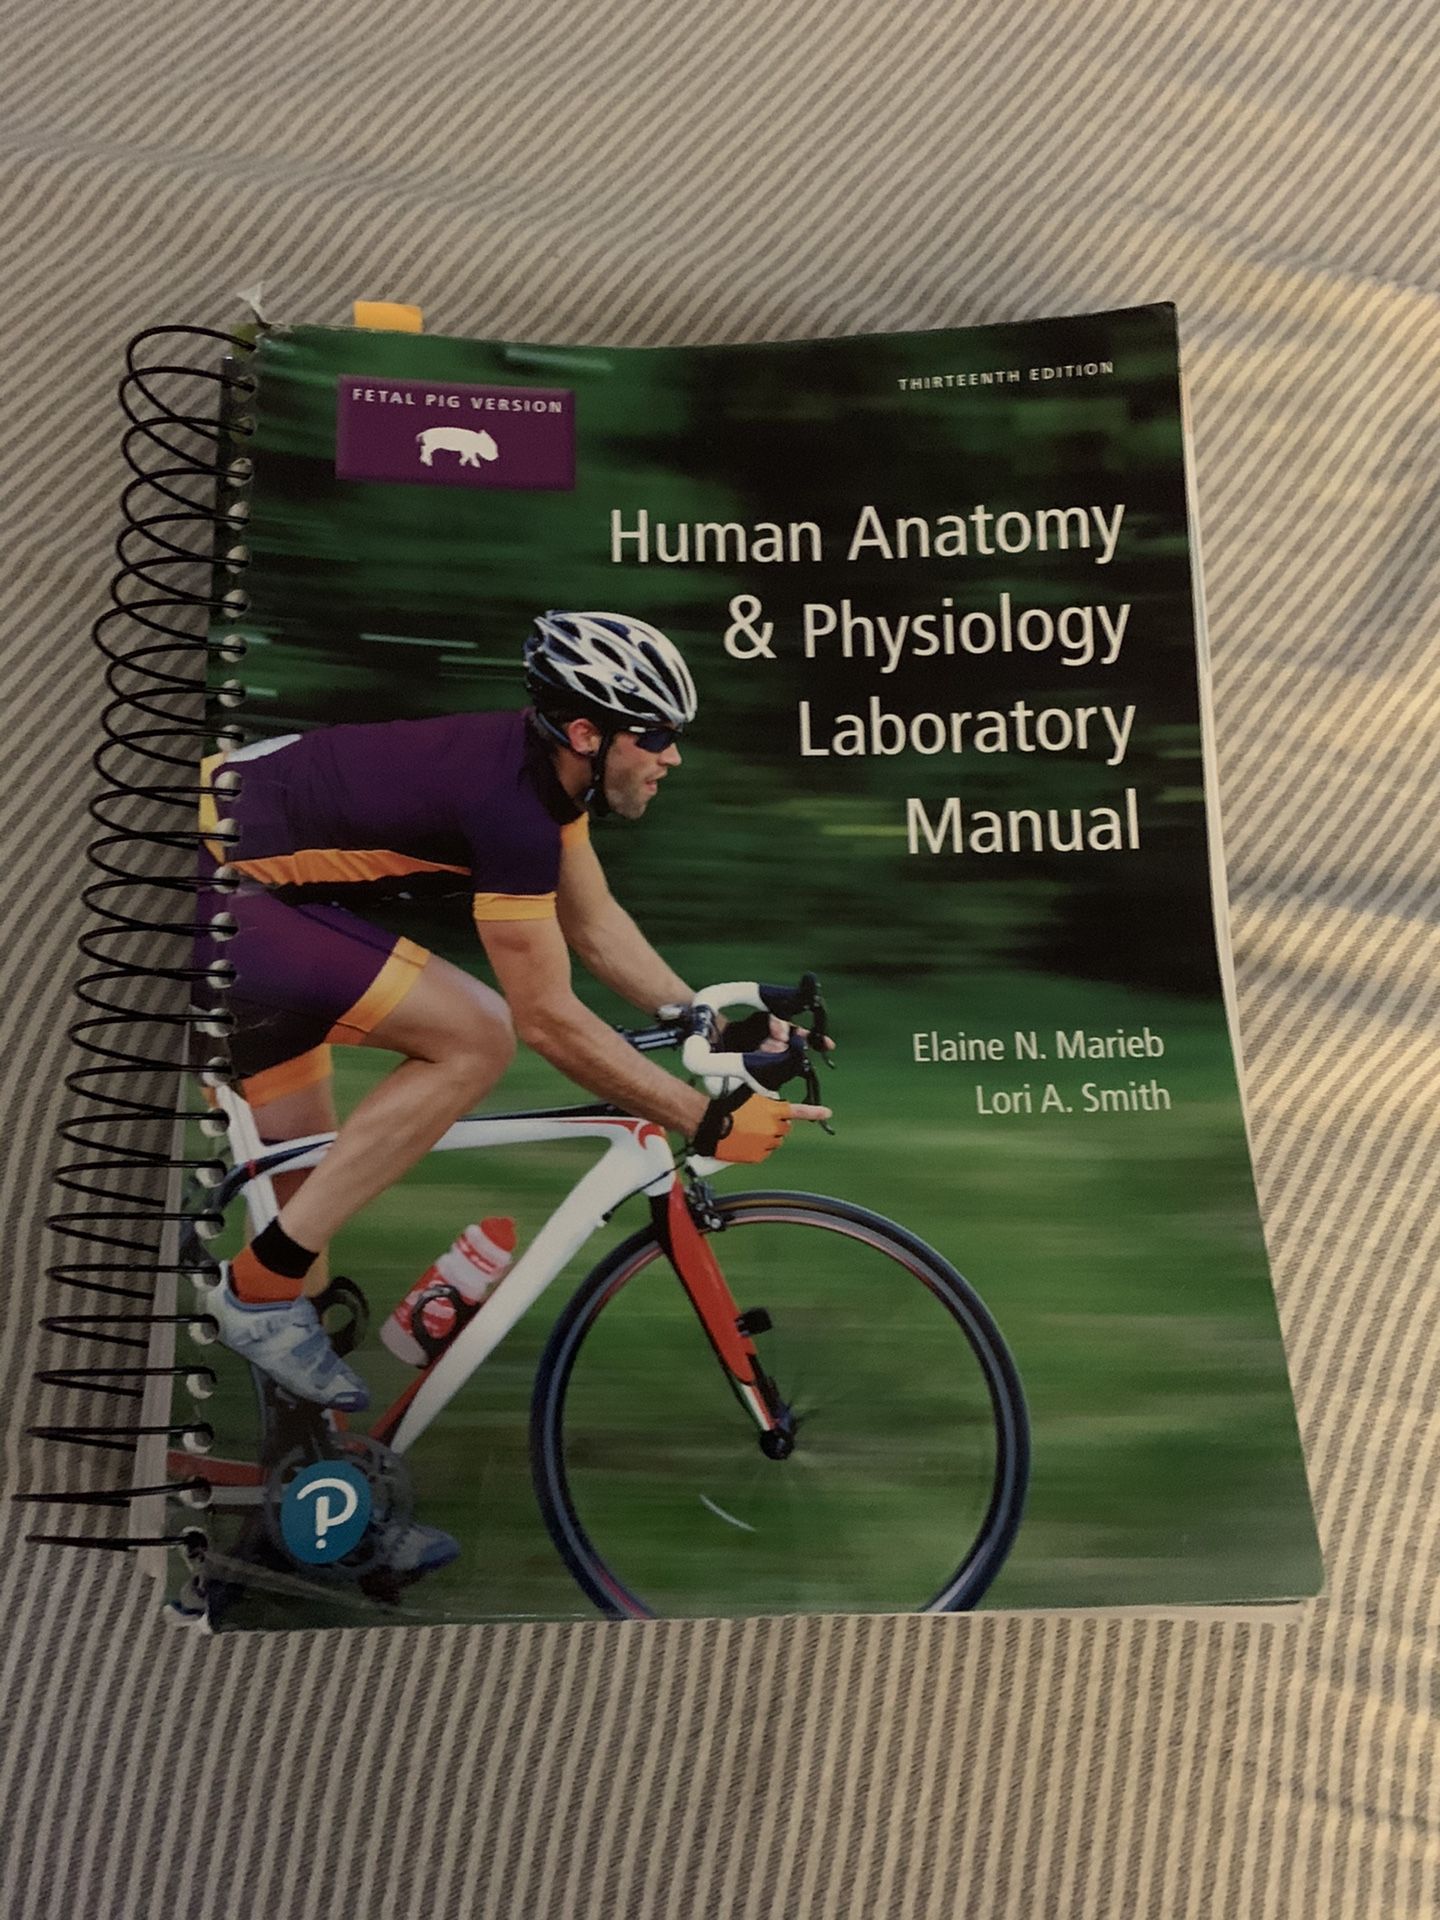 Human A and P Anatomy and Physiology Laboratory College Textbook Manual